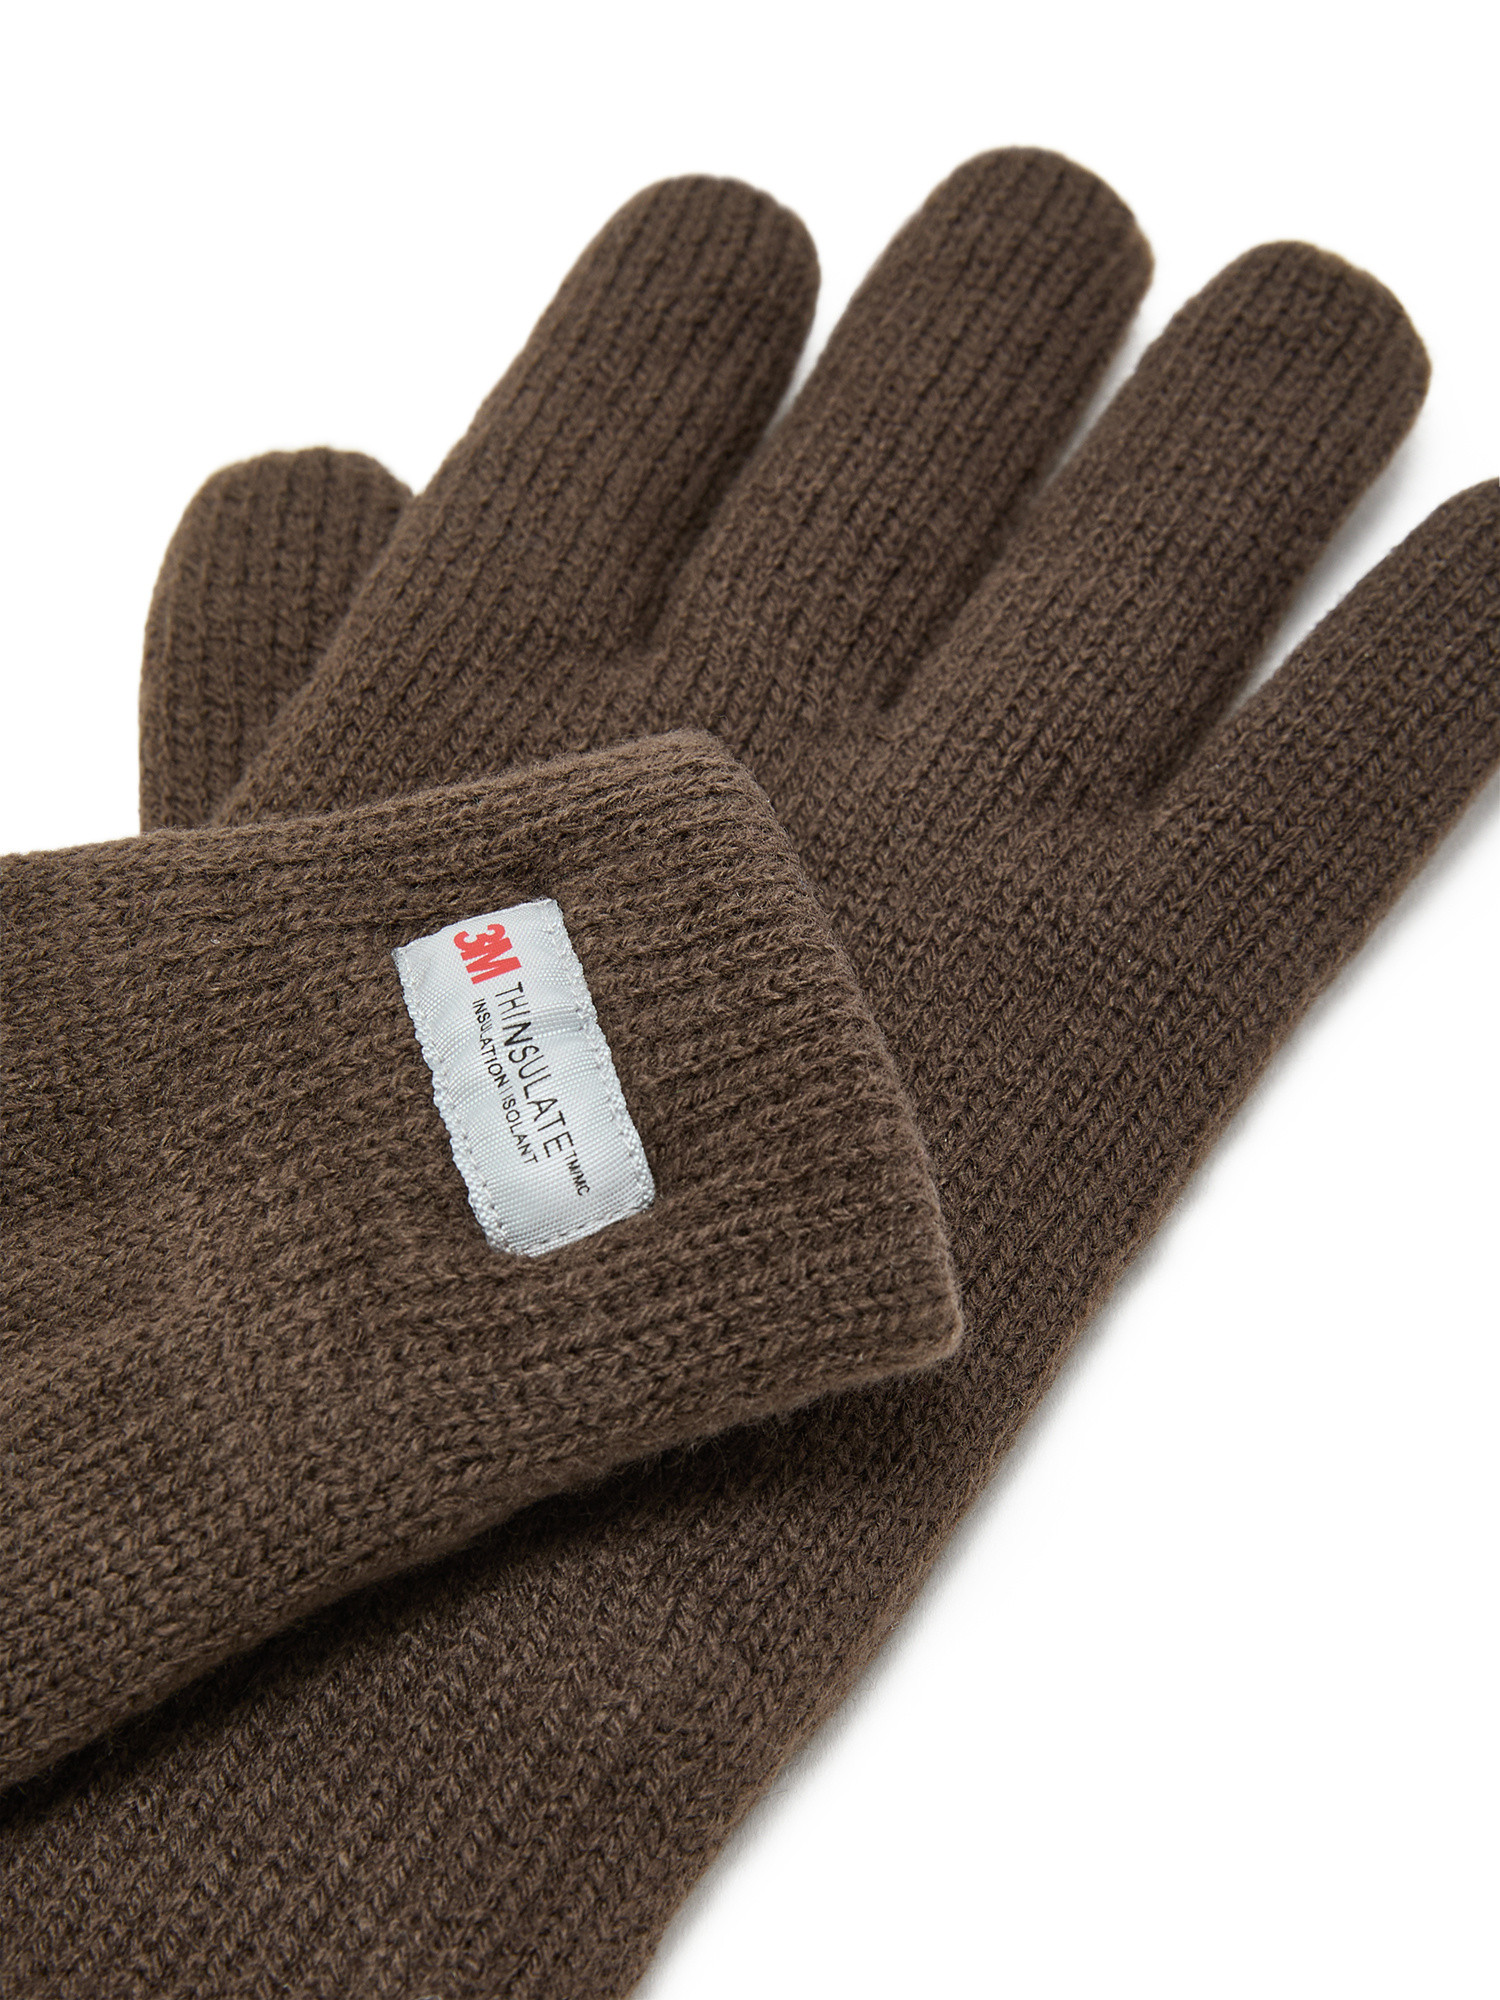 Luca D'Altieri - Knitted gloves, Brown, large image number 1